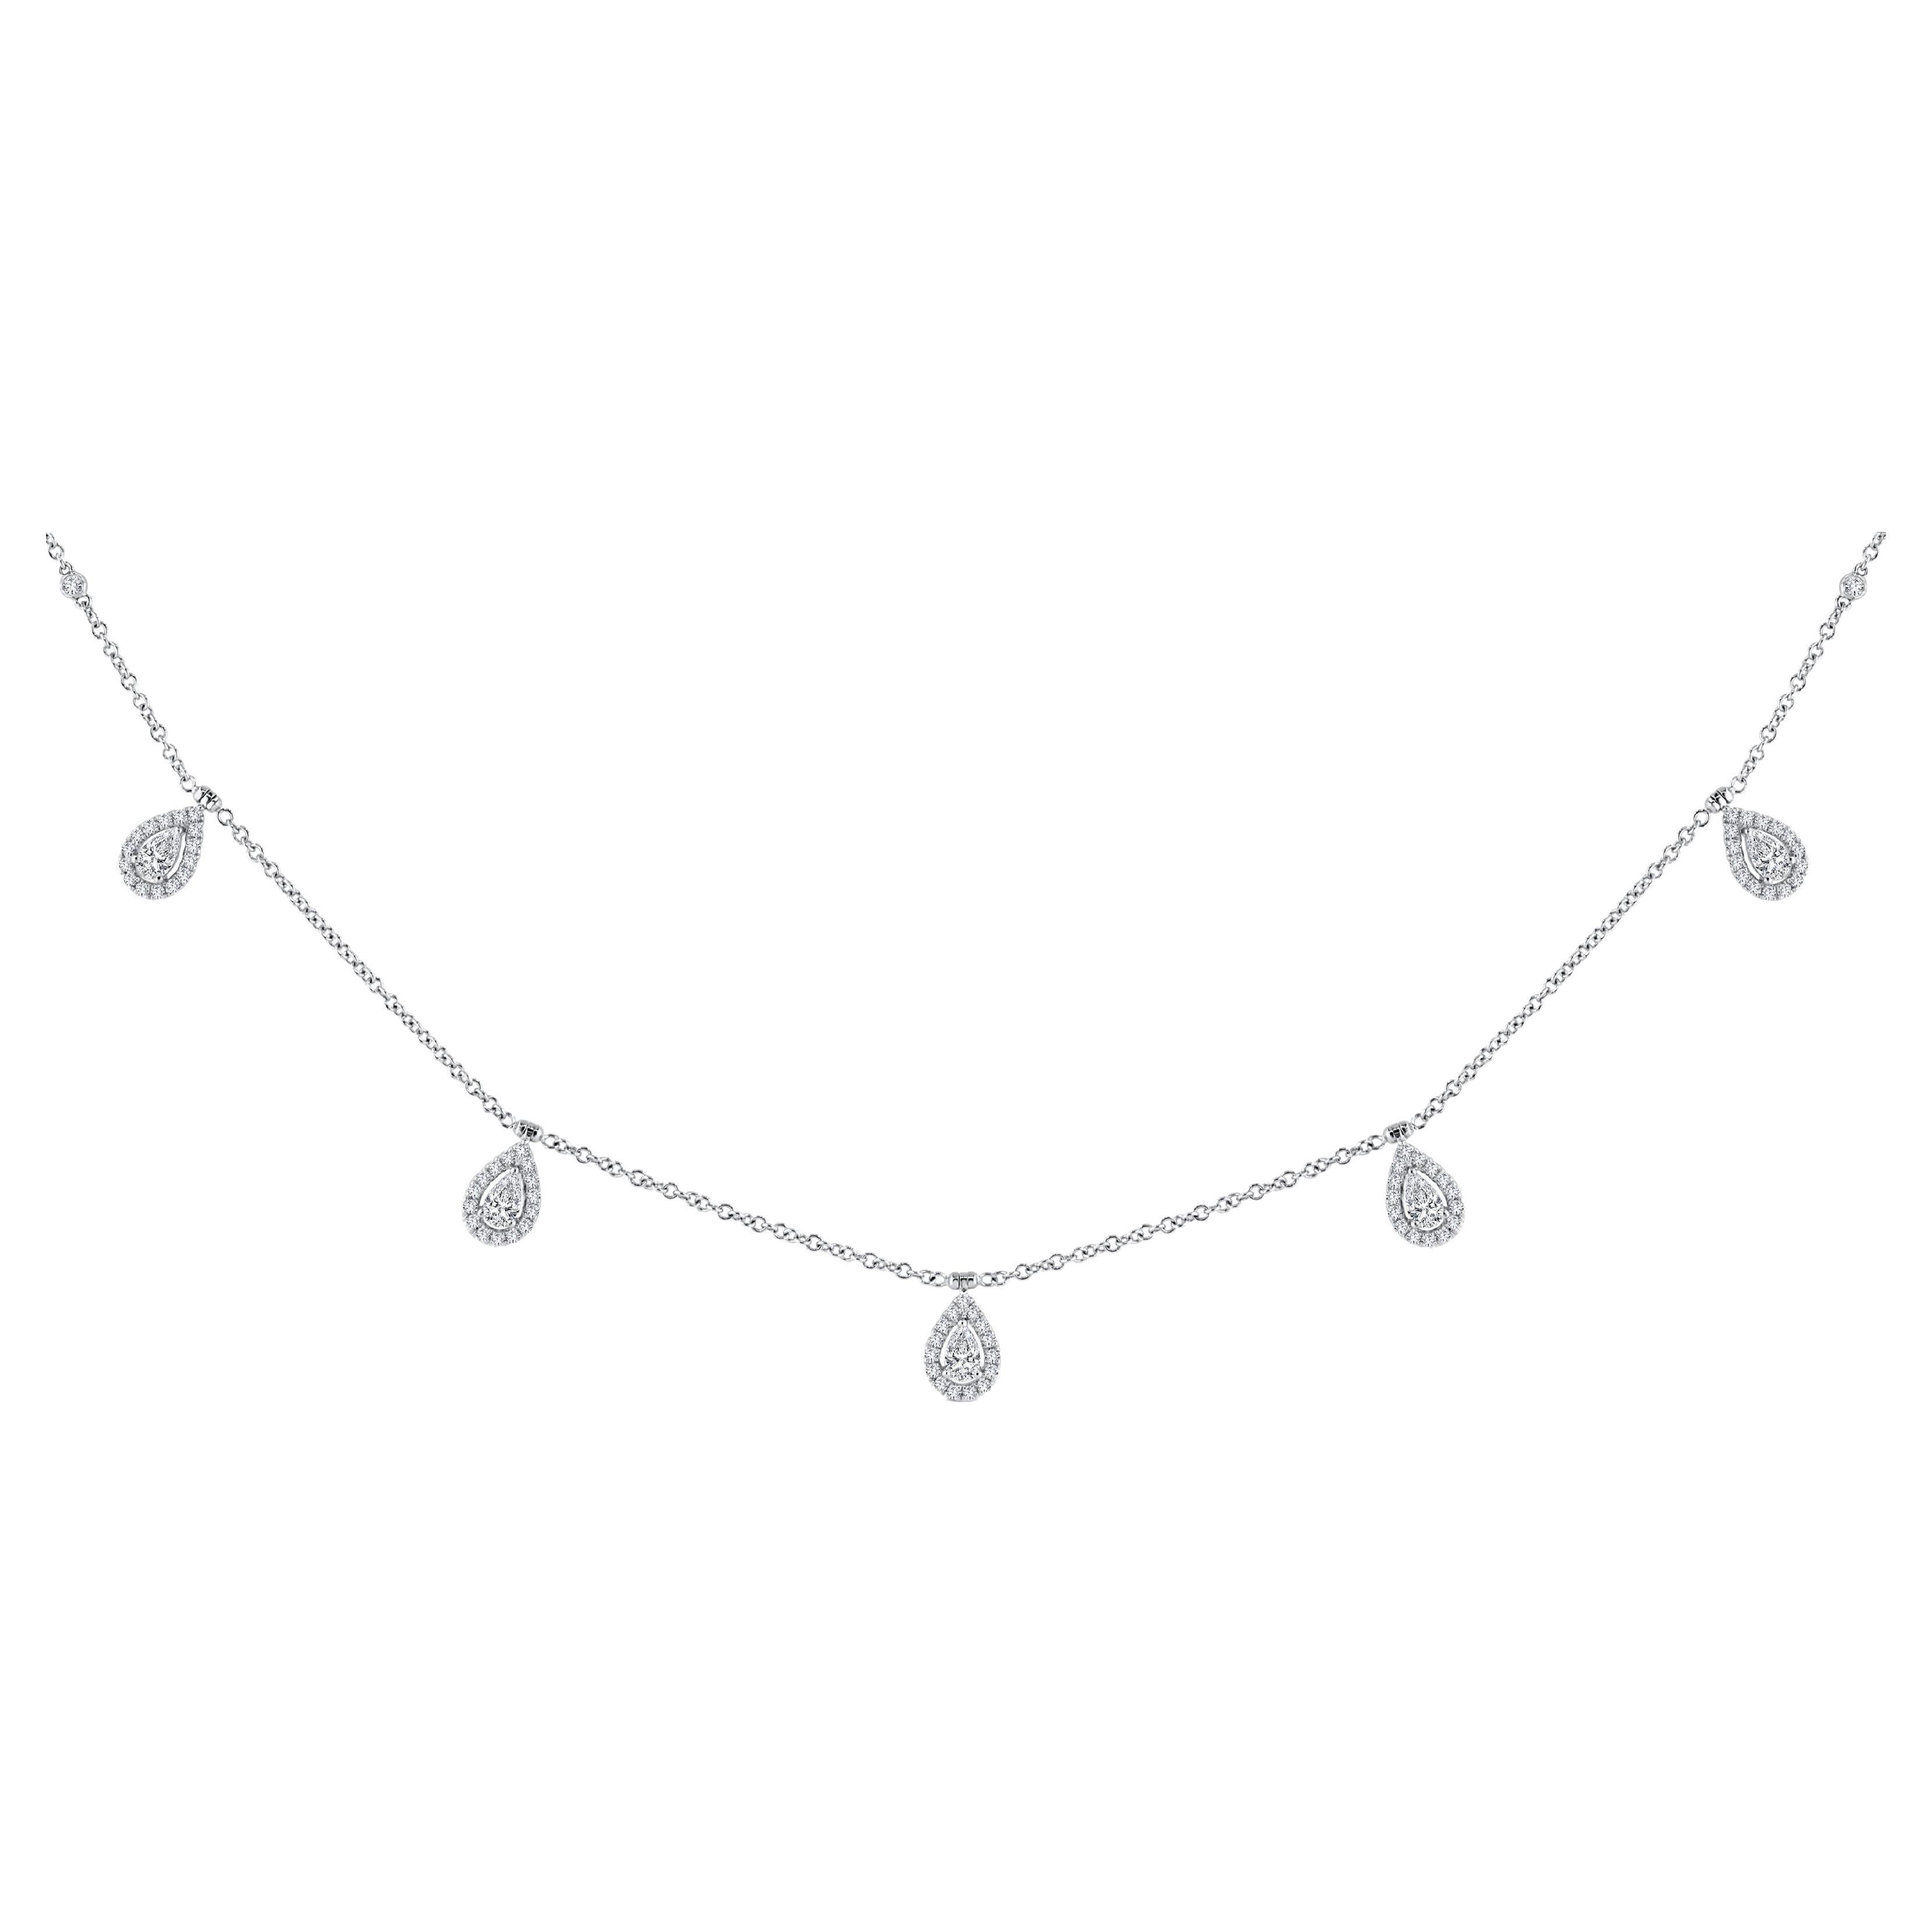 1.58 Carat Total Weight Pear Diamond Halo Station Necklace in 14k White Gold